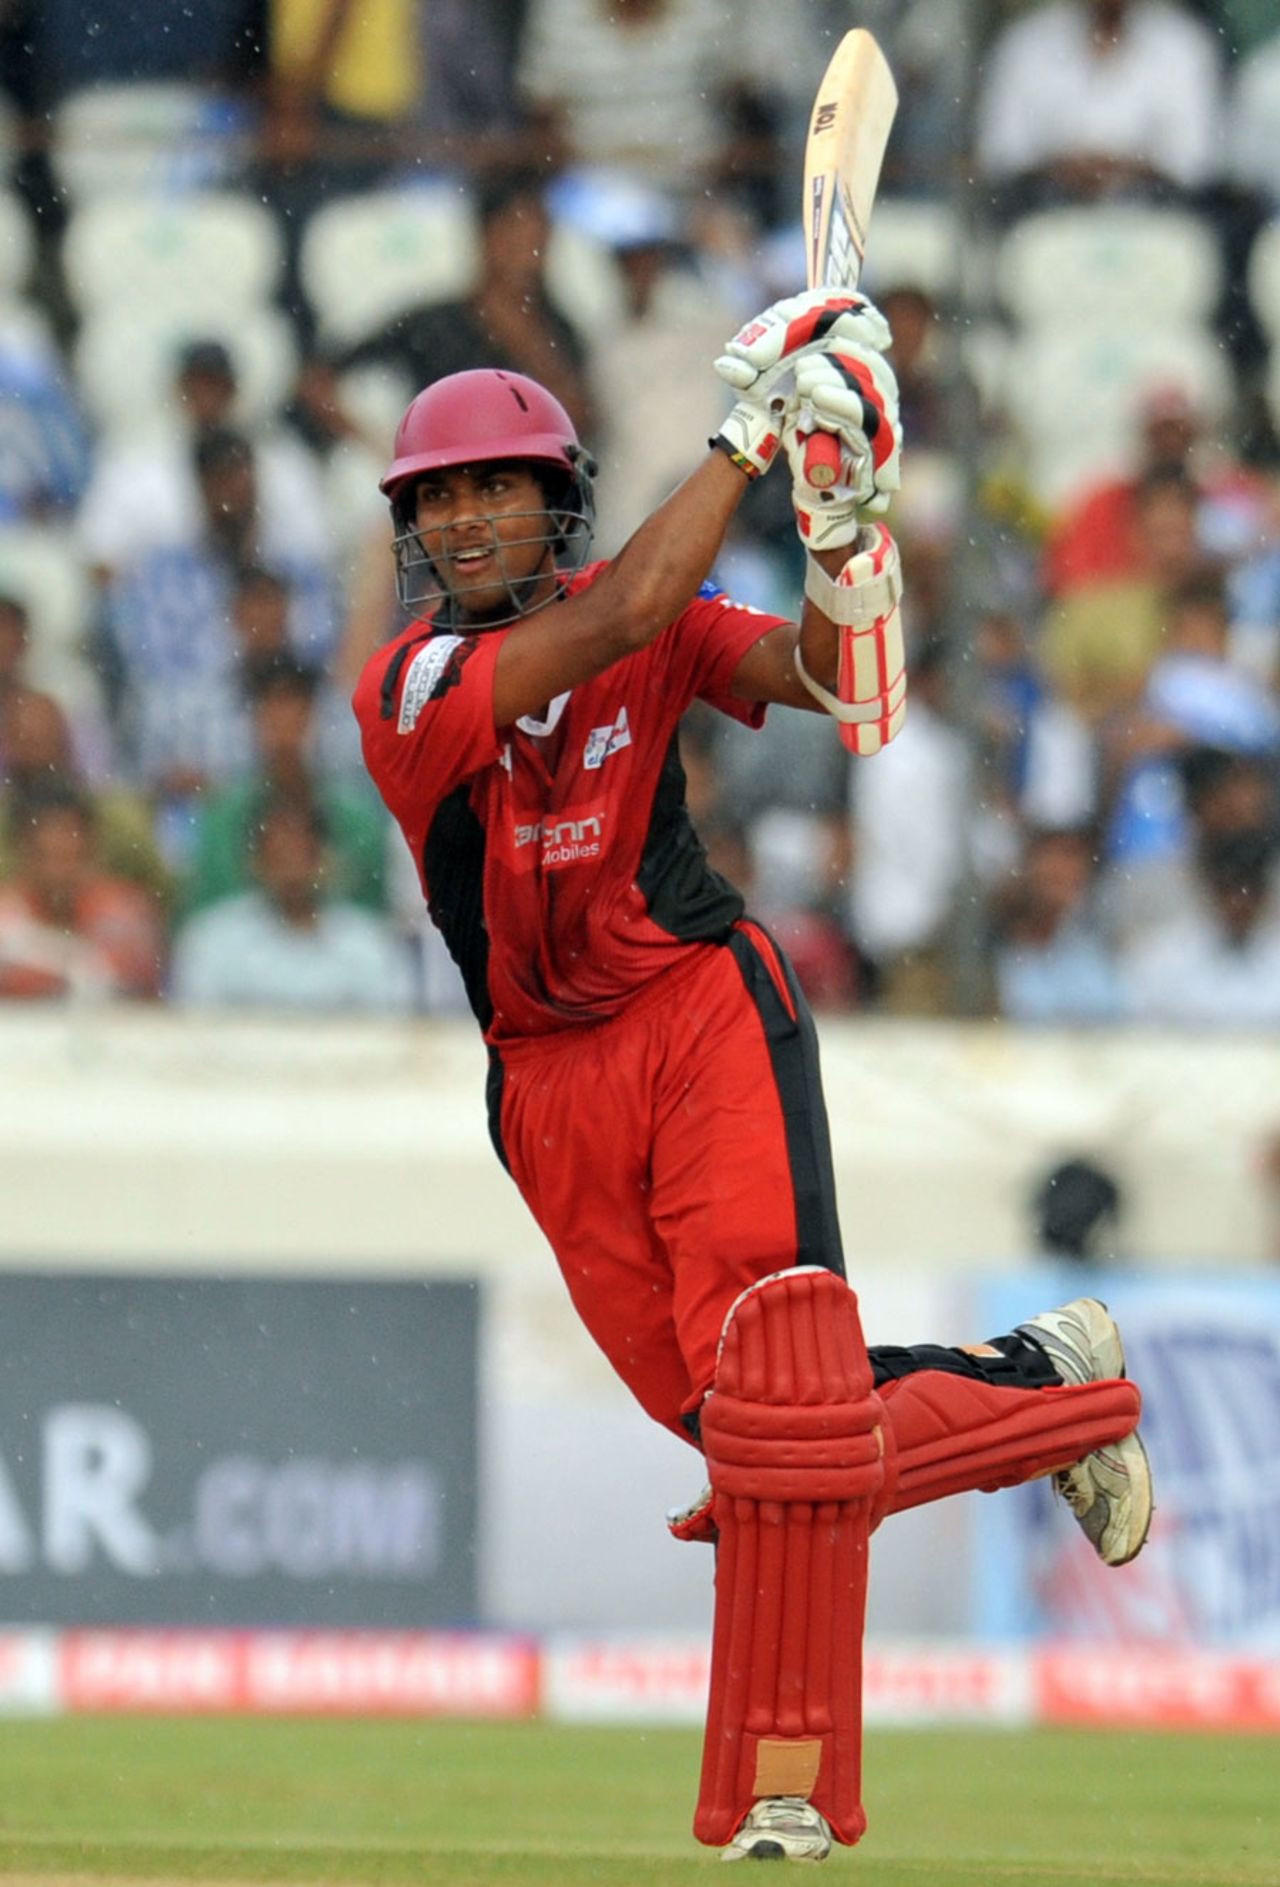 Dinesh Chandimal hits down the ground, Leicestershire v Ruhuna, CLT20 qualifier, Hyderabad, September 21, 2011